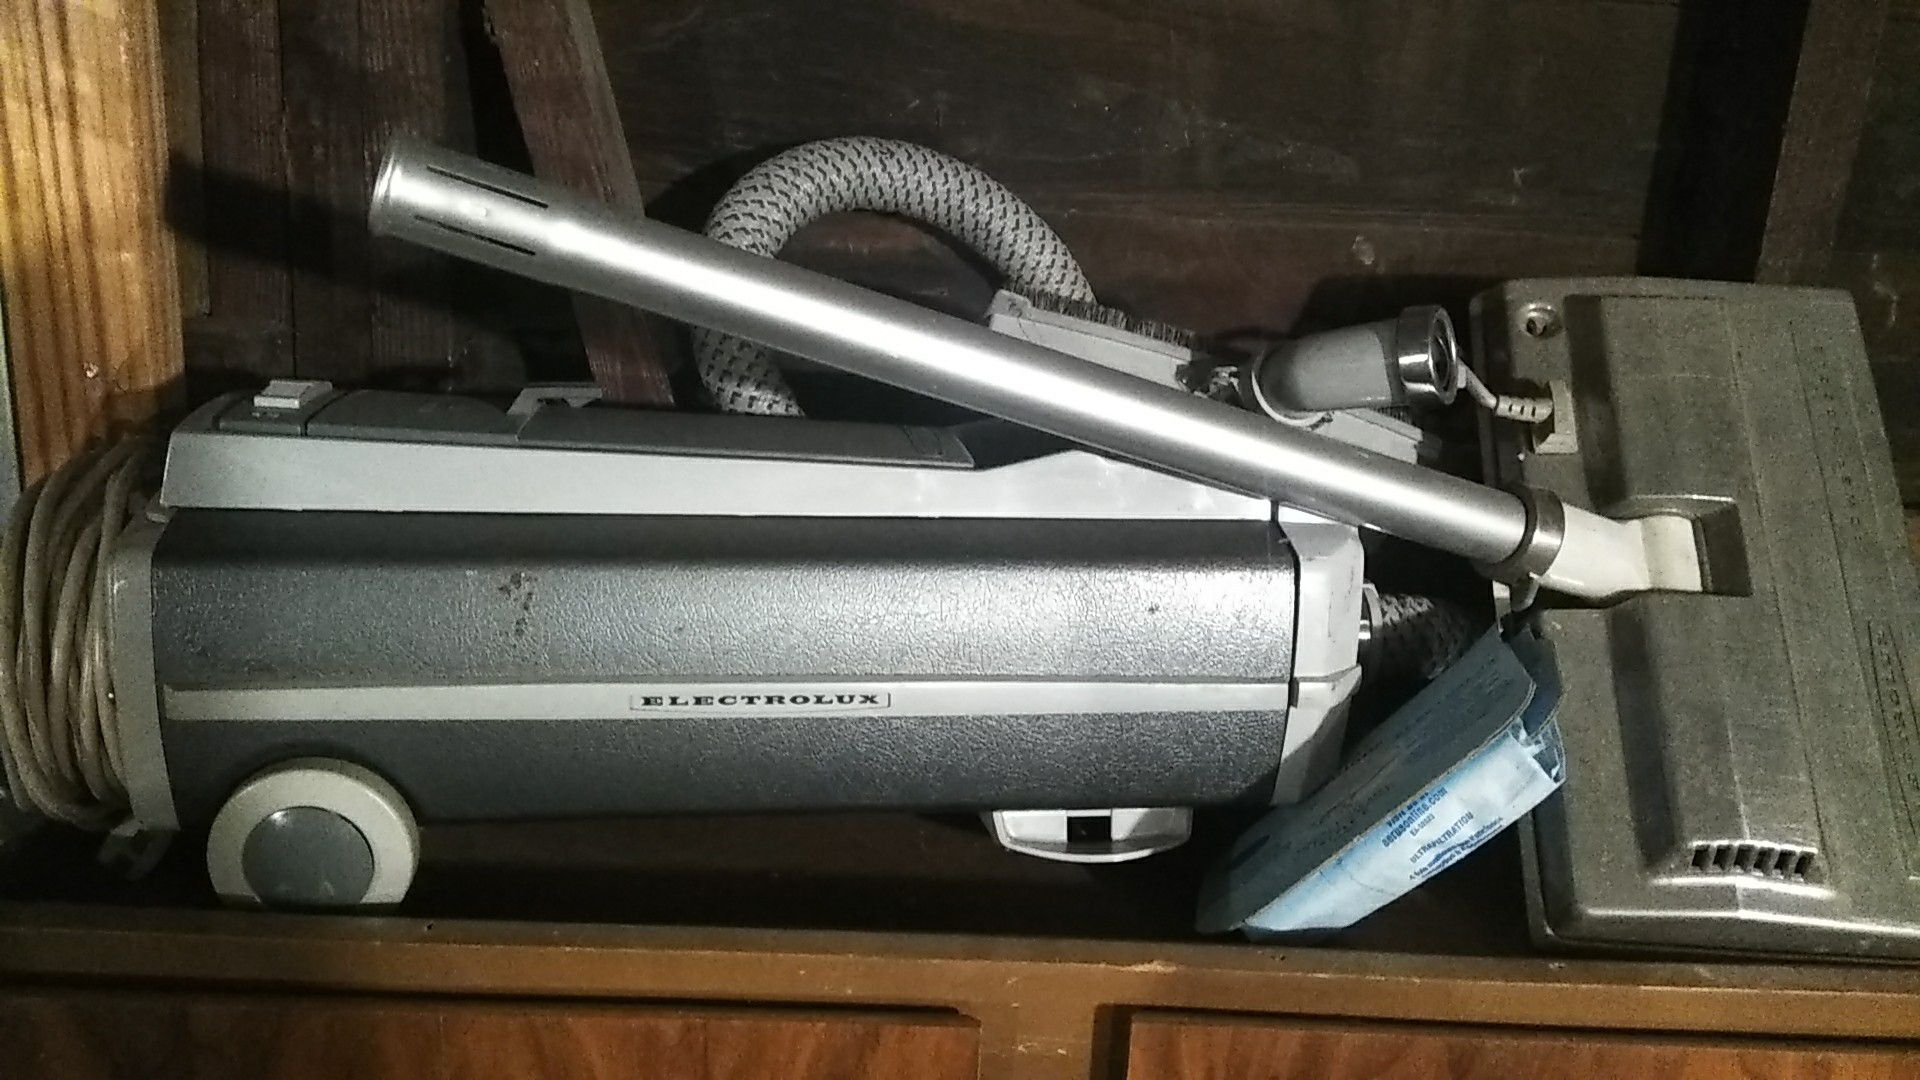 Never used Electrolux vacuum